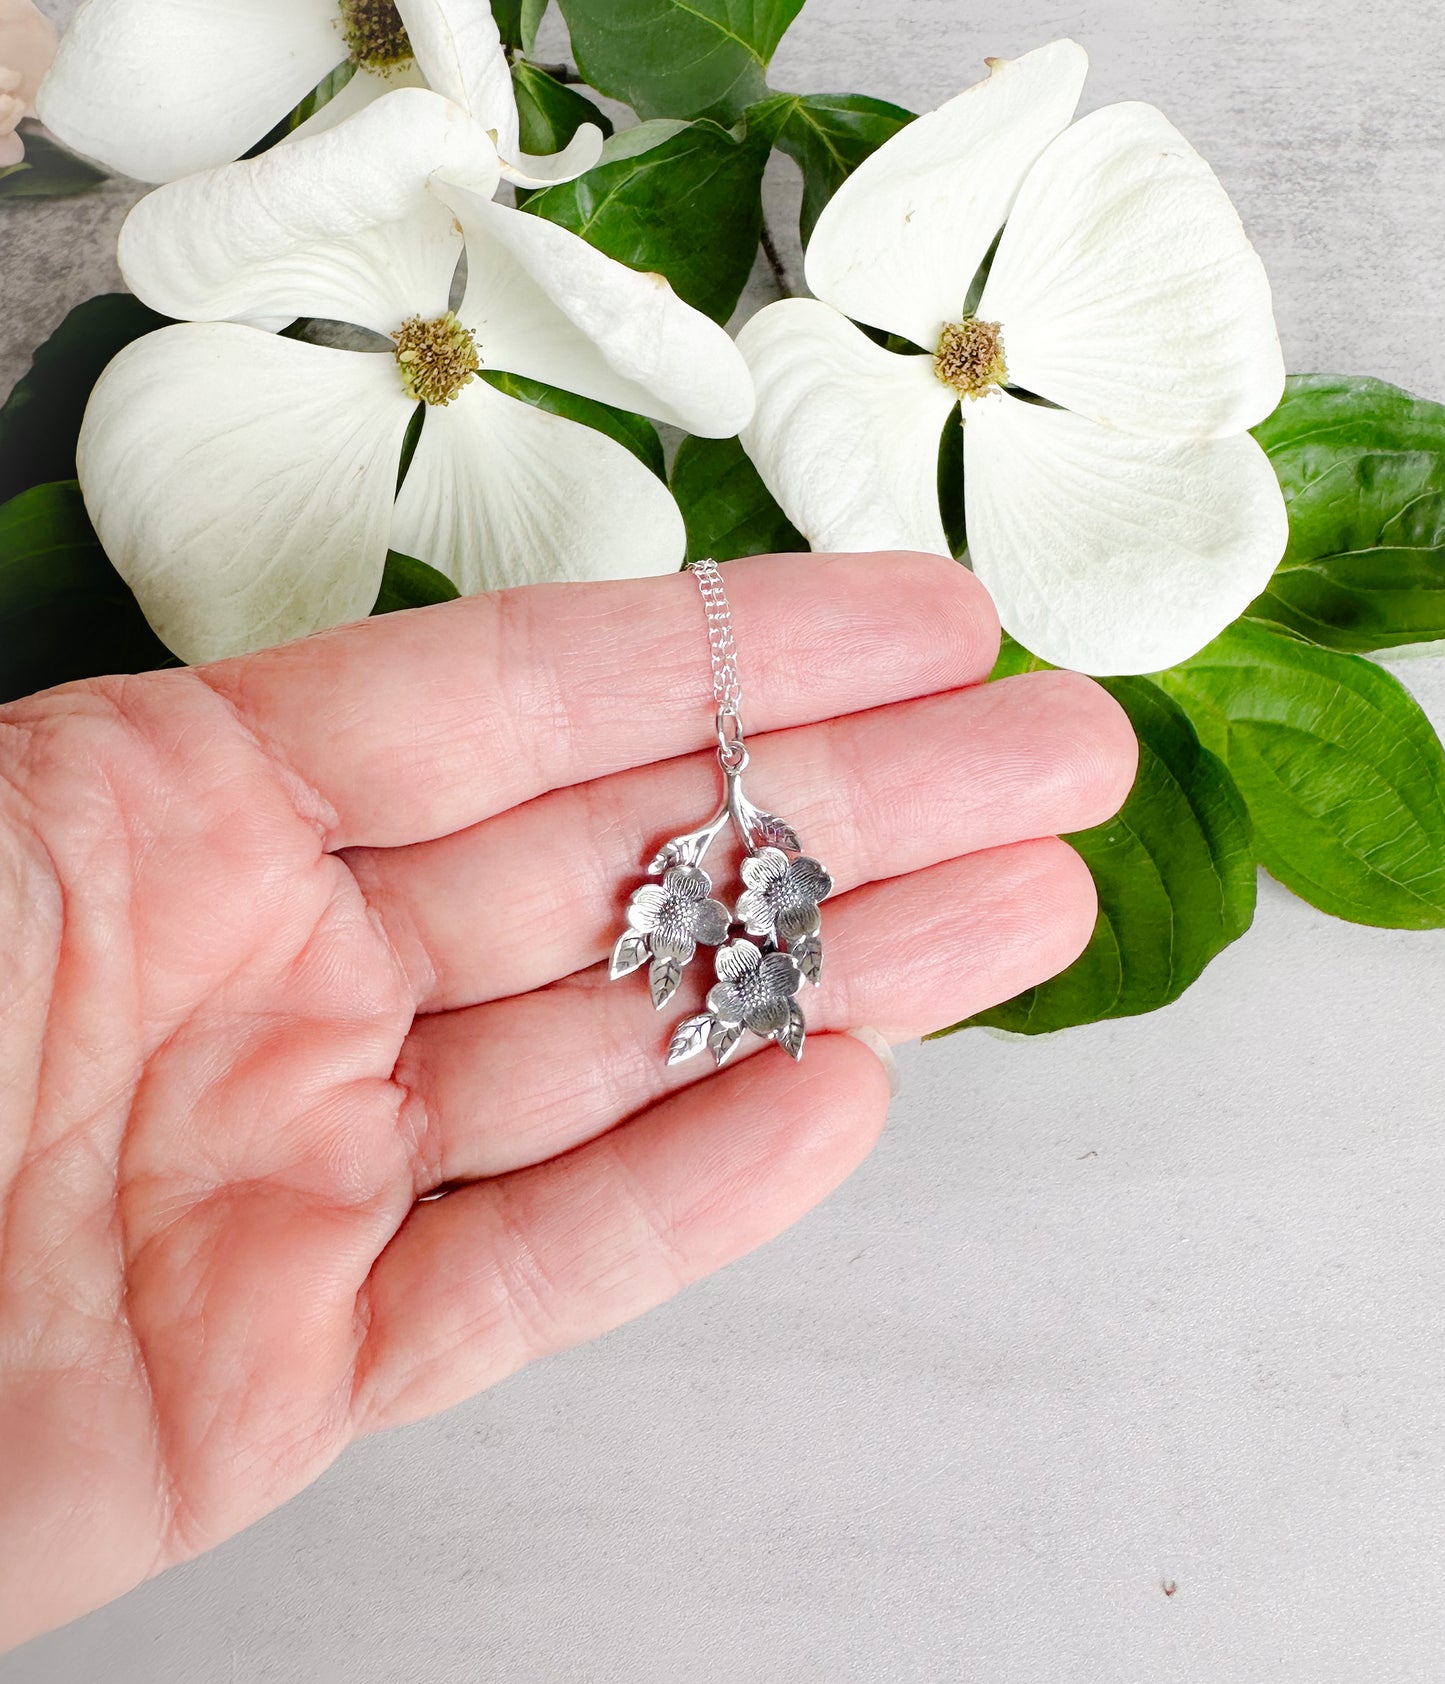 Dogwood Tree Blossoms Necklace